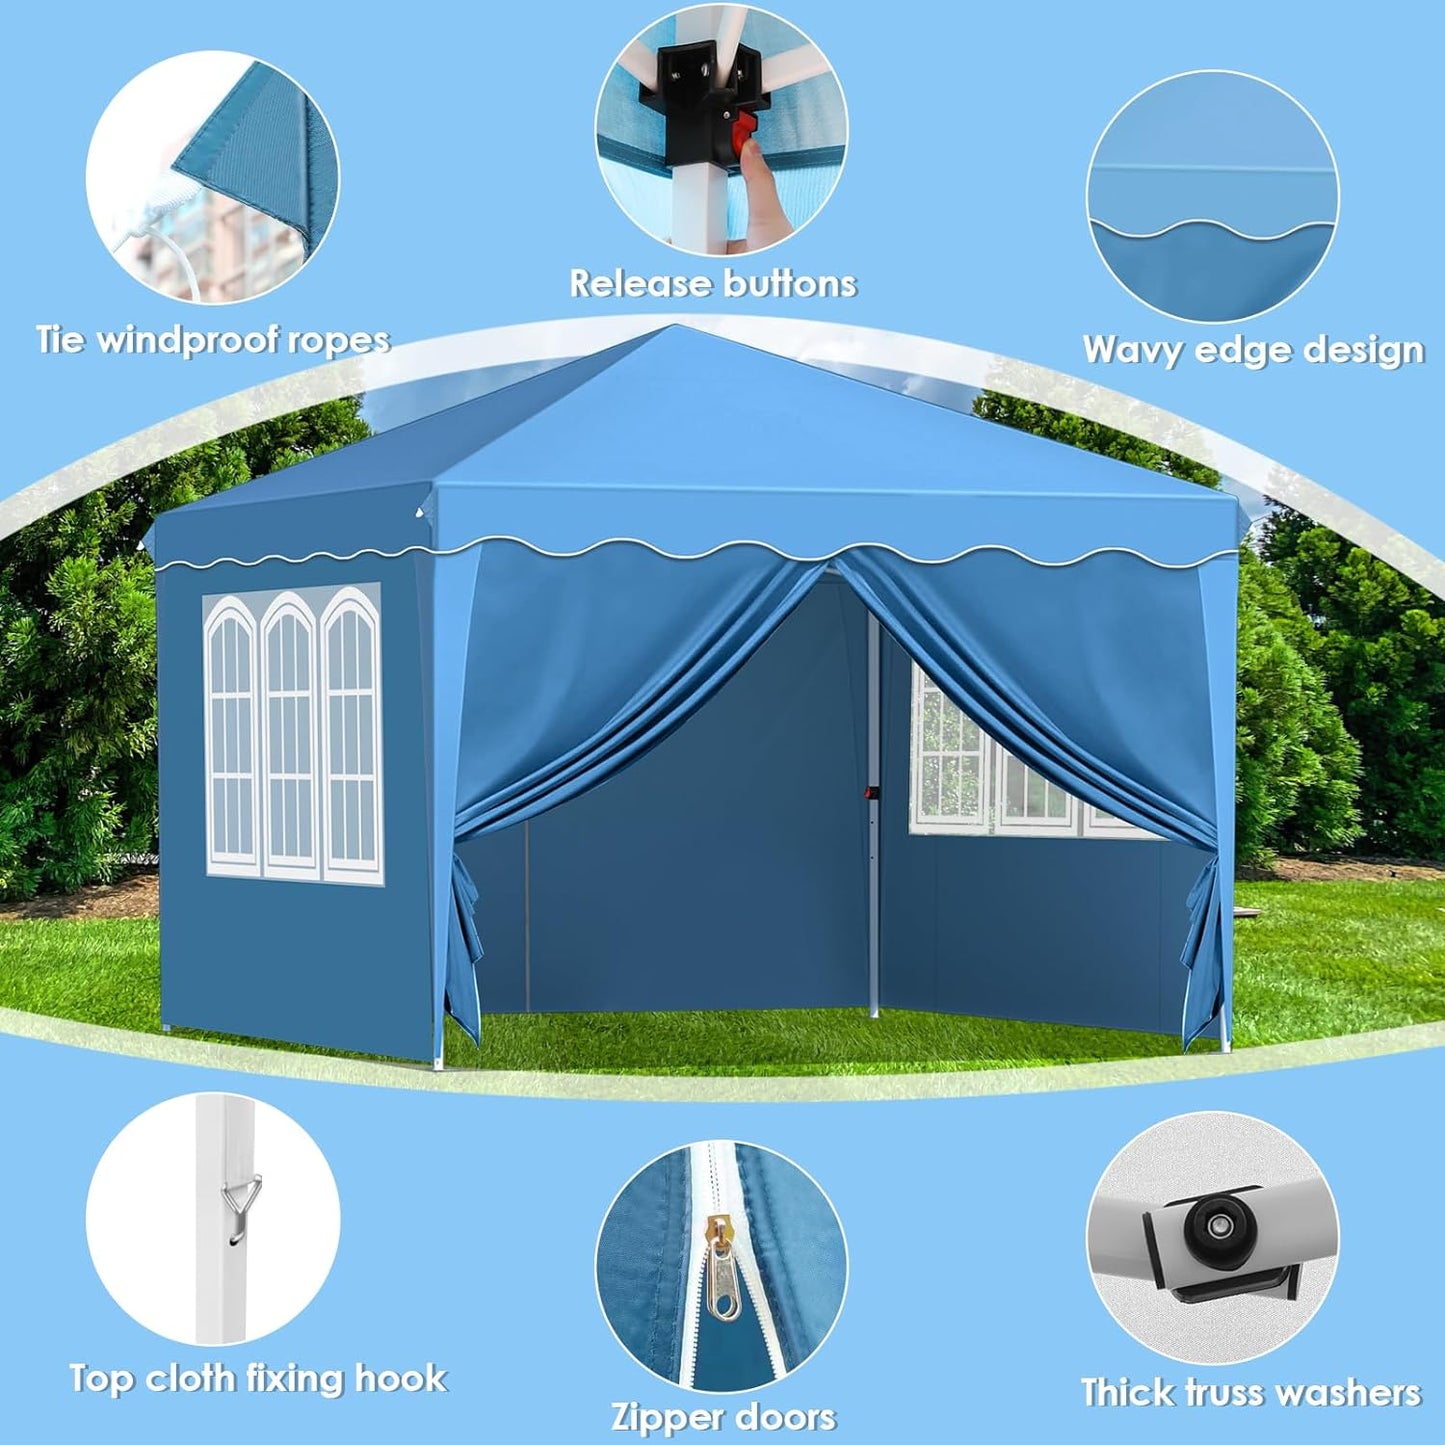 Arlopu 10'x10' Pop Up Commercial Canopy Tent, Fully Waterproof Instant Gazebo Tent with 4 Removable Sidewall, Heavy Duty Outdoor Party Events Camping Beach Canopies, Upgraded Removable Wheel Bag